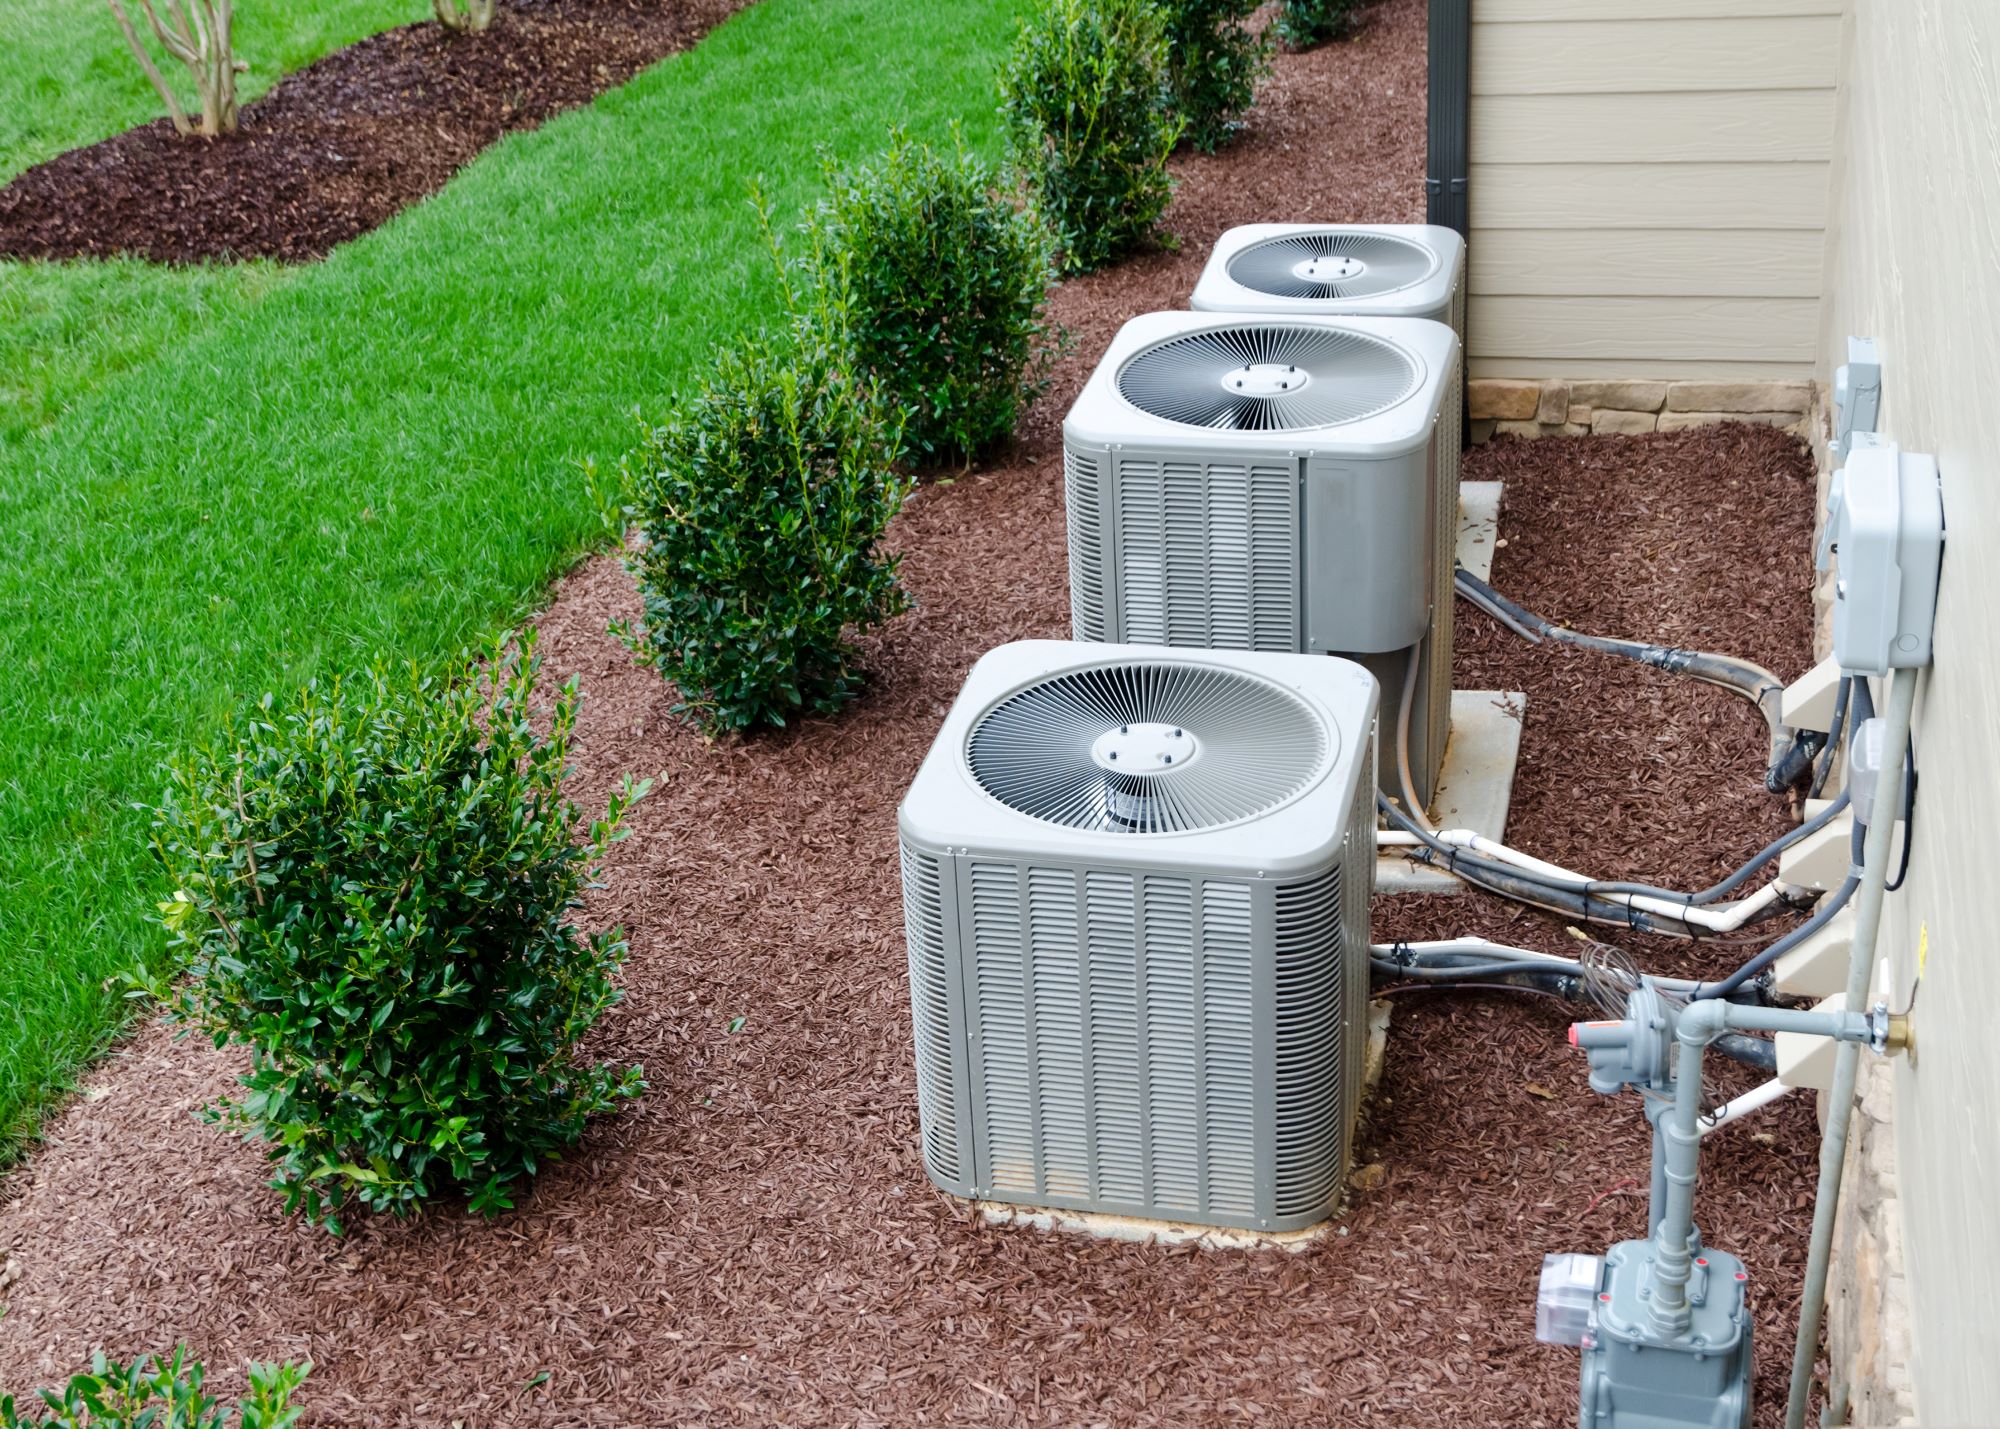 An HVAC system requires proper installation, use, and maintenance to last. Discover what to look for when looking to maximize a unit's lifespan.